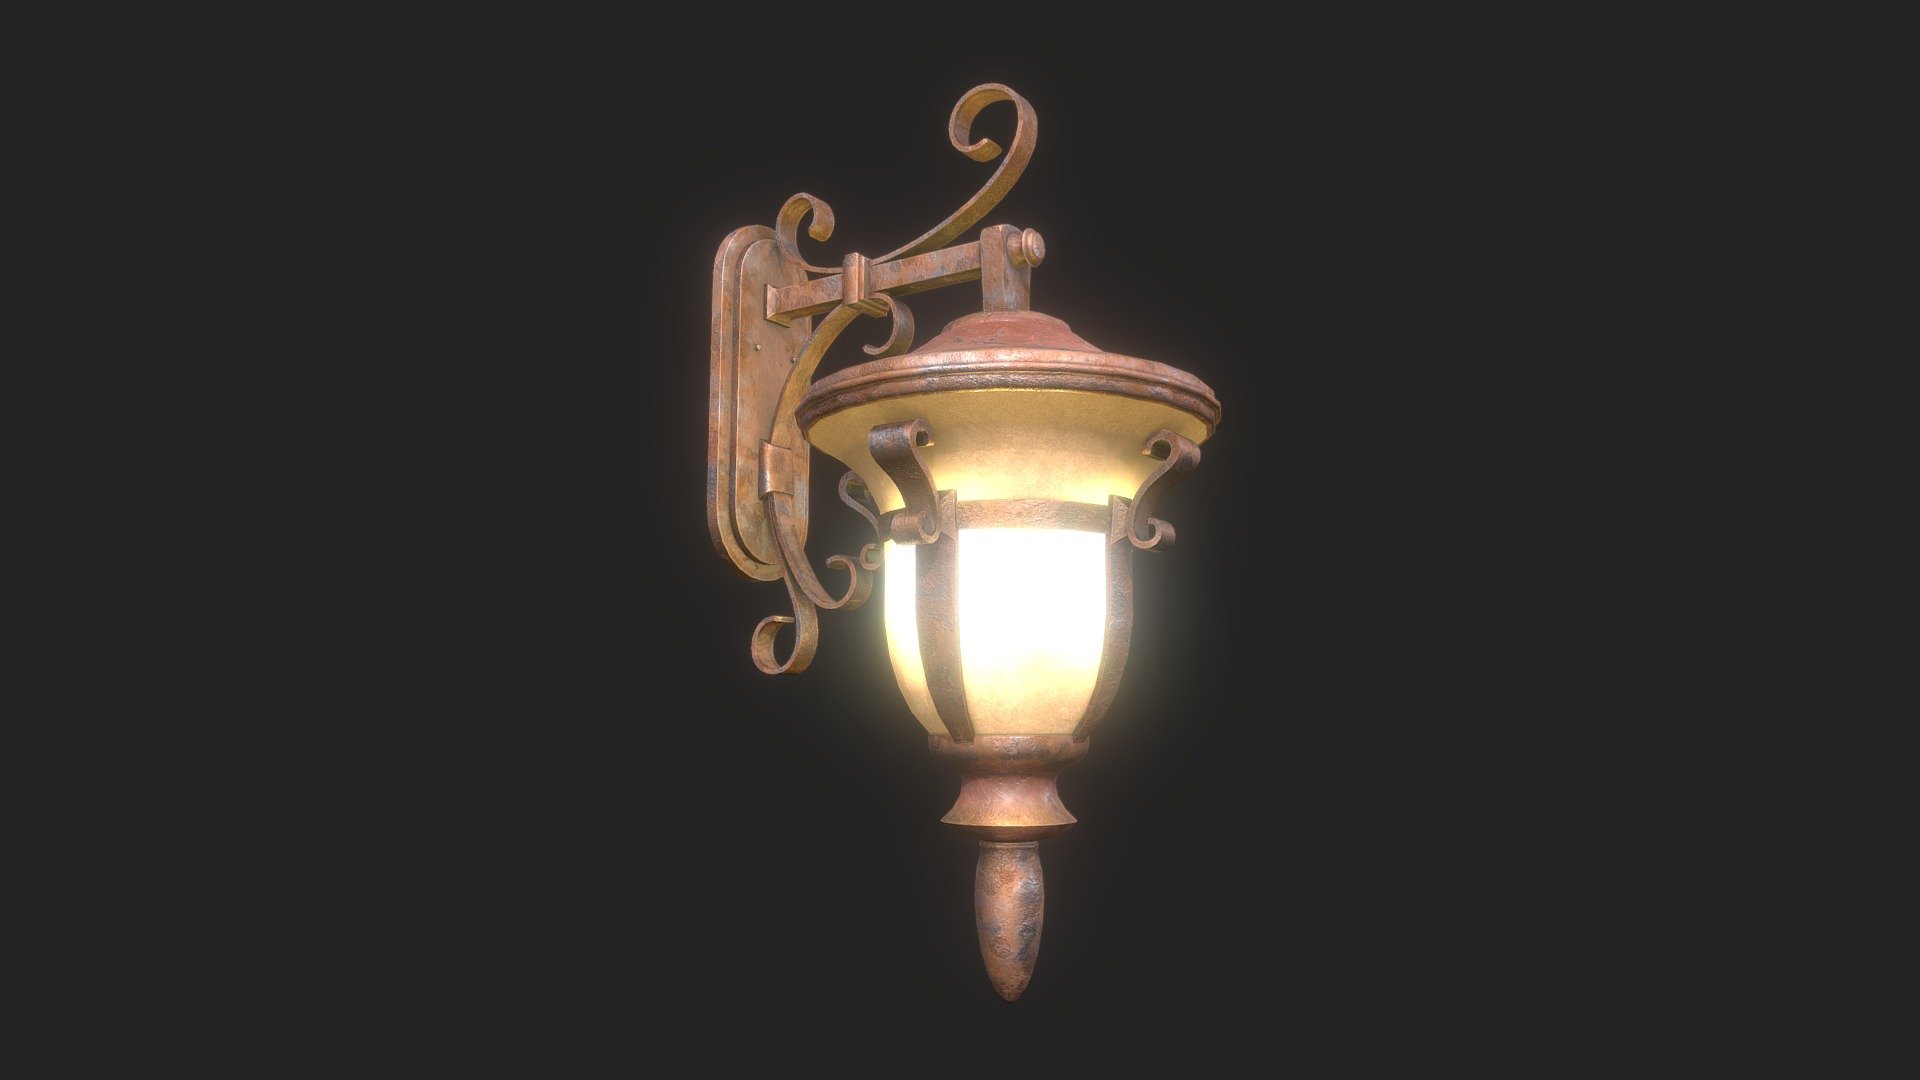 2048x2048 textures (PBR Metal Rough, Unity HDRP, Unity Standard Metallic and Unreal Engine):

PBR Metal Rough- BaseColor, AO, Height, Normal, Roughness and Metallic;

Unity HDRP: BaseColor, MaskMap, Normal;

Unity Standard Metallic: AlbedoTransparency, MetallicSmoothness, Normal;

Unreal Engine: BaseColor, Normal, OcclusionRoughnessMetallic;

The package also has the .fbx, .obj, .dae and .blend file 3d model